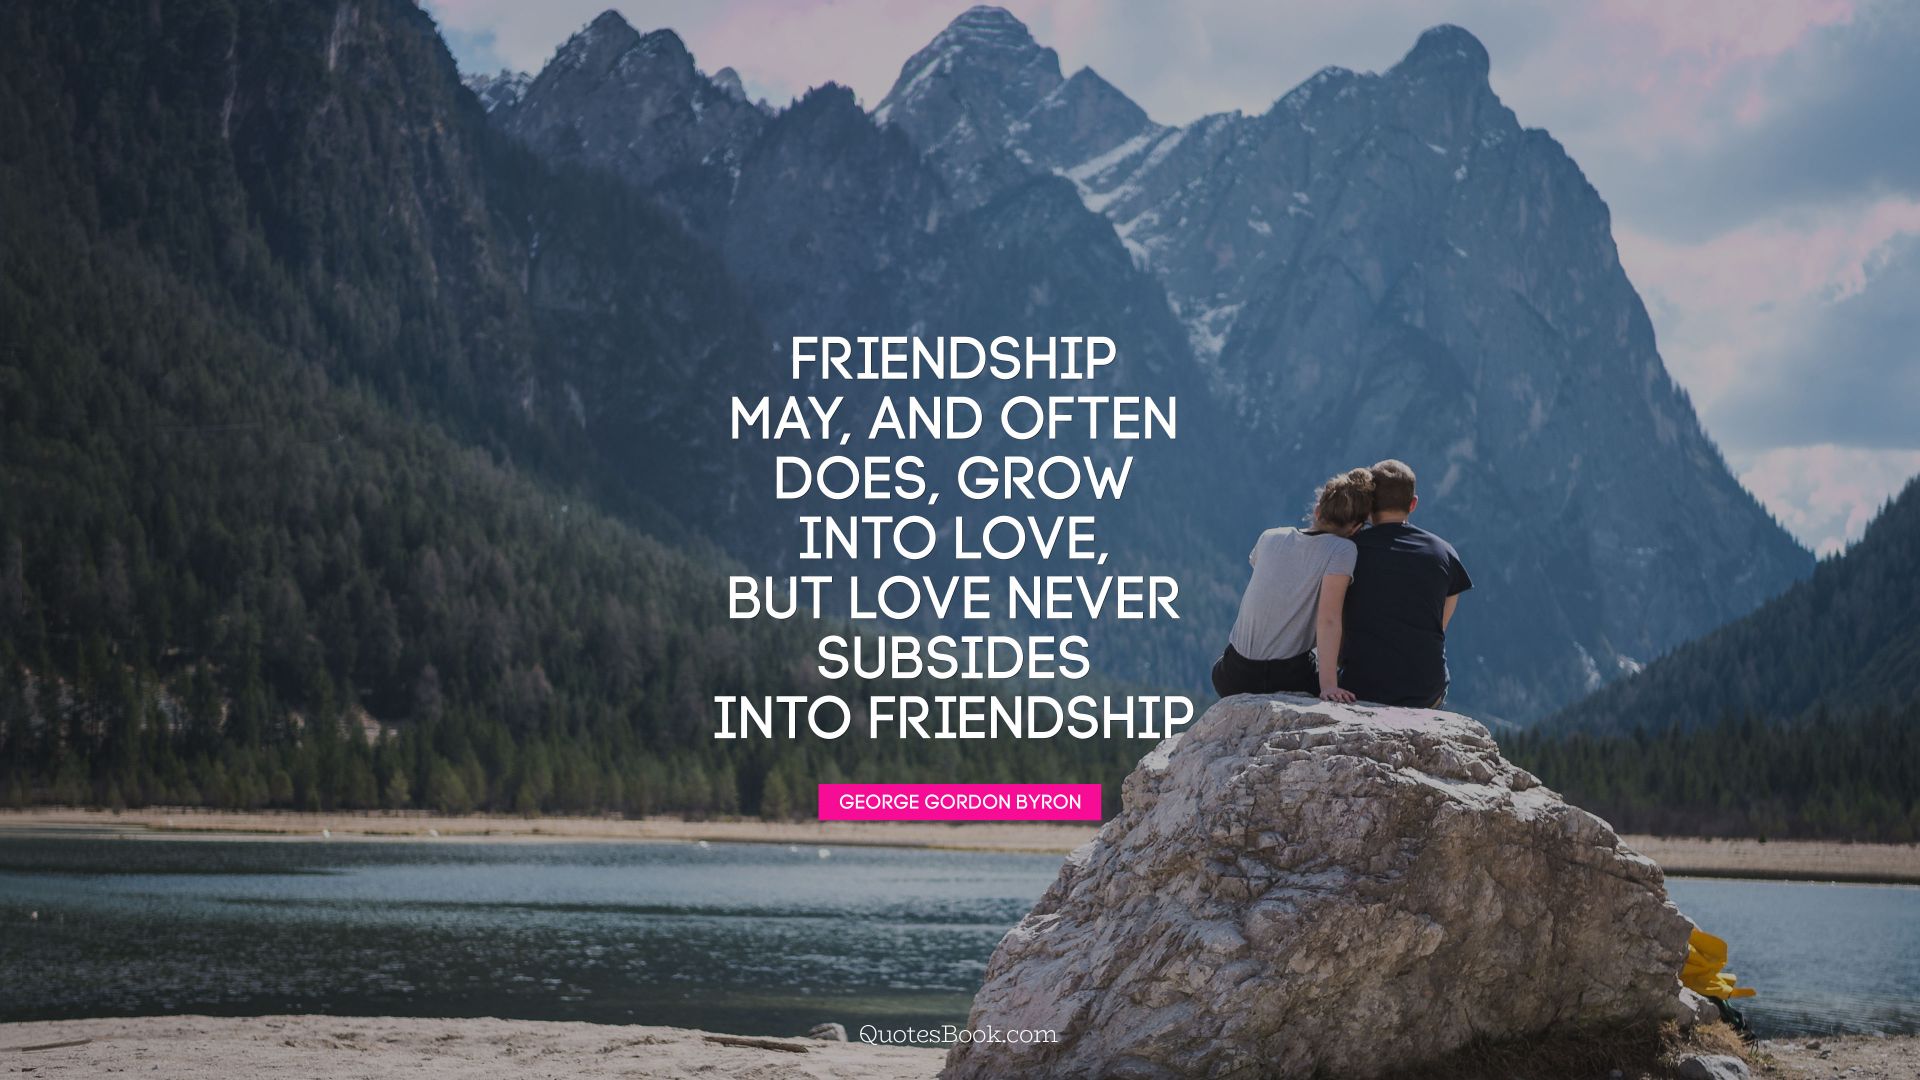 Friendship may, and often does, grow into love, but love never 
subsides into friendship. - Quote by George Gordon Byron